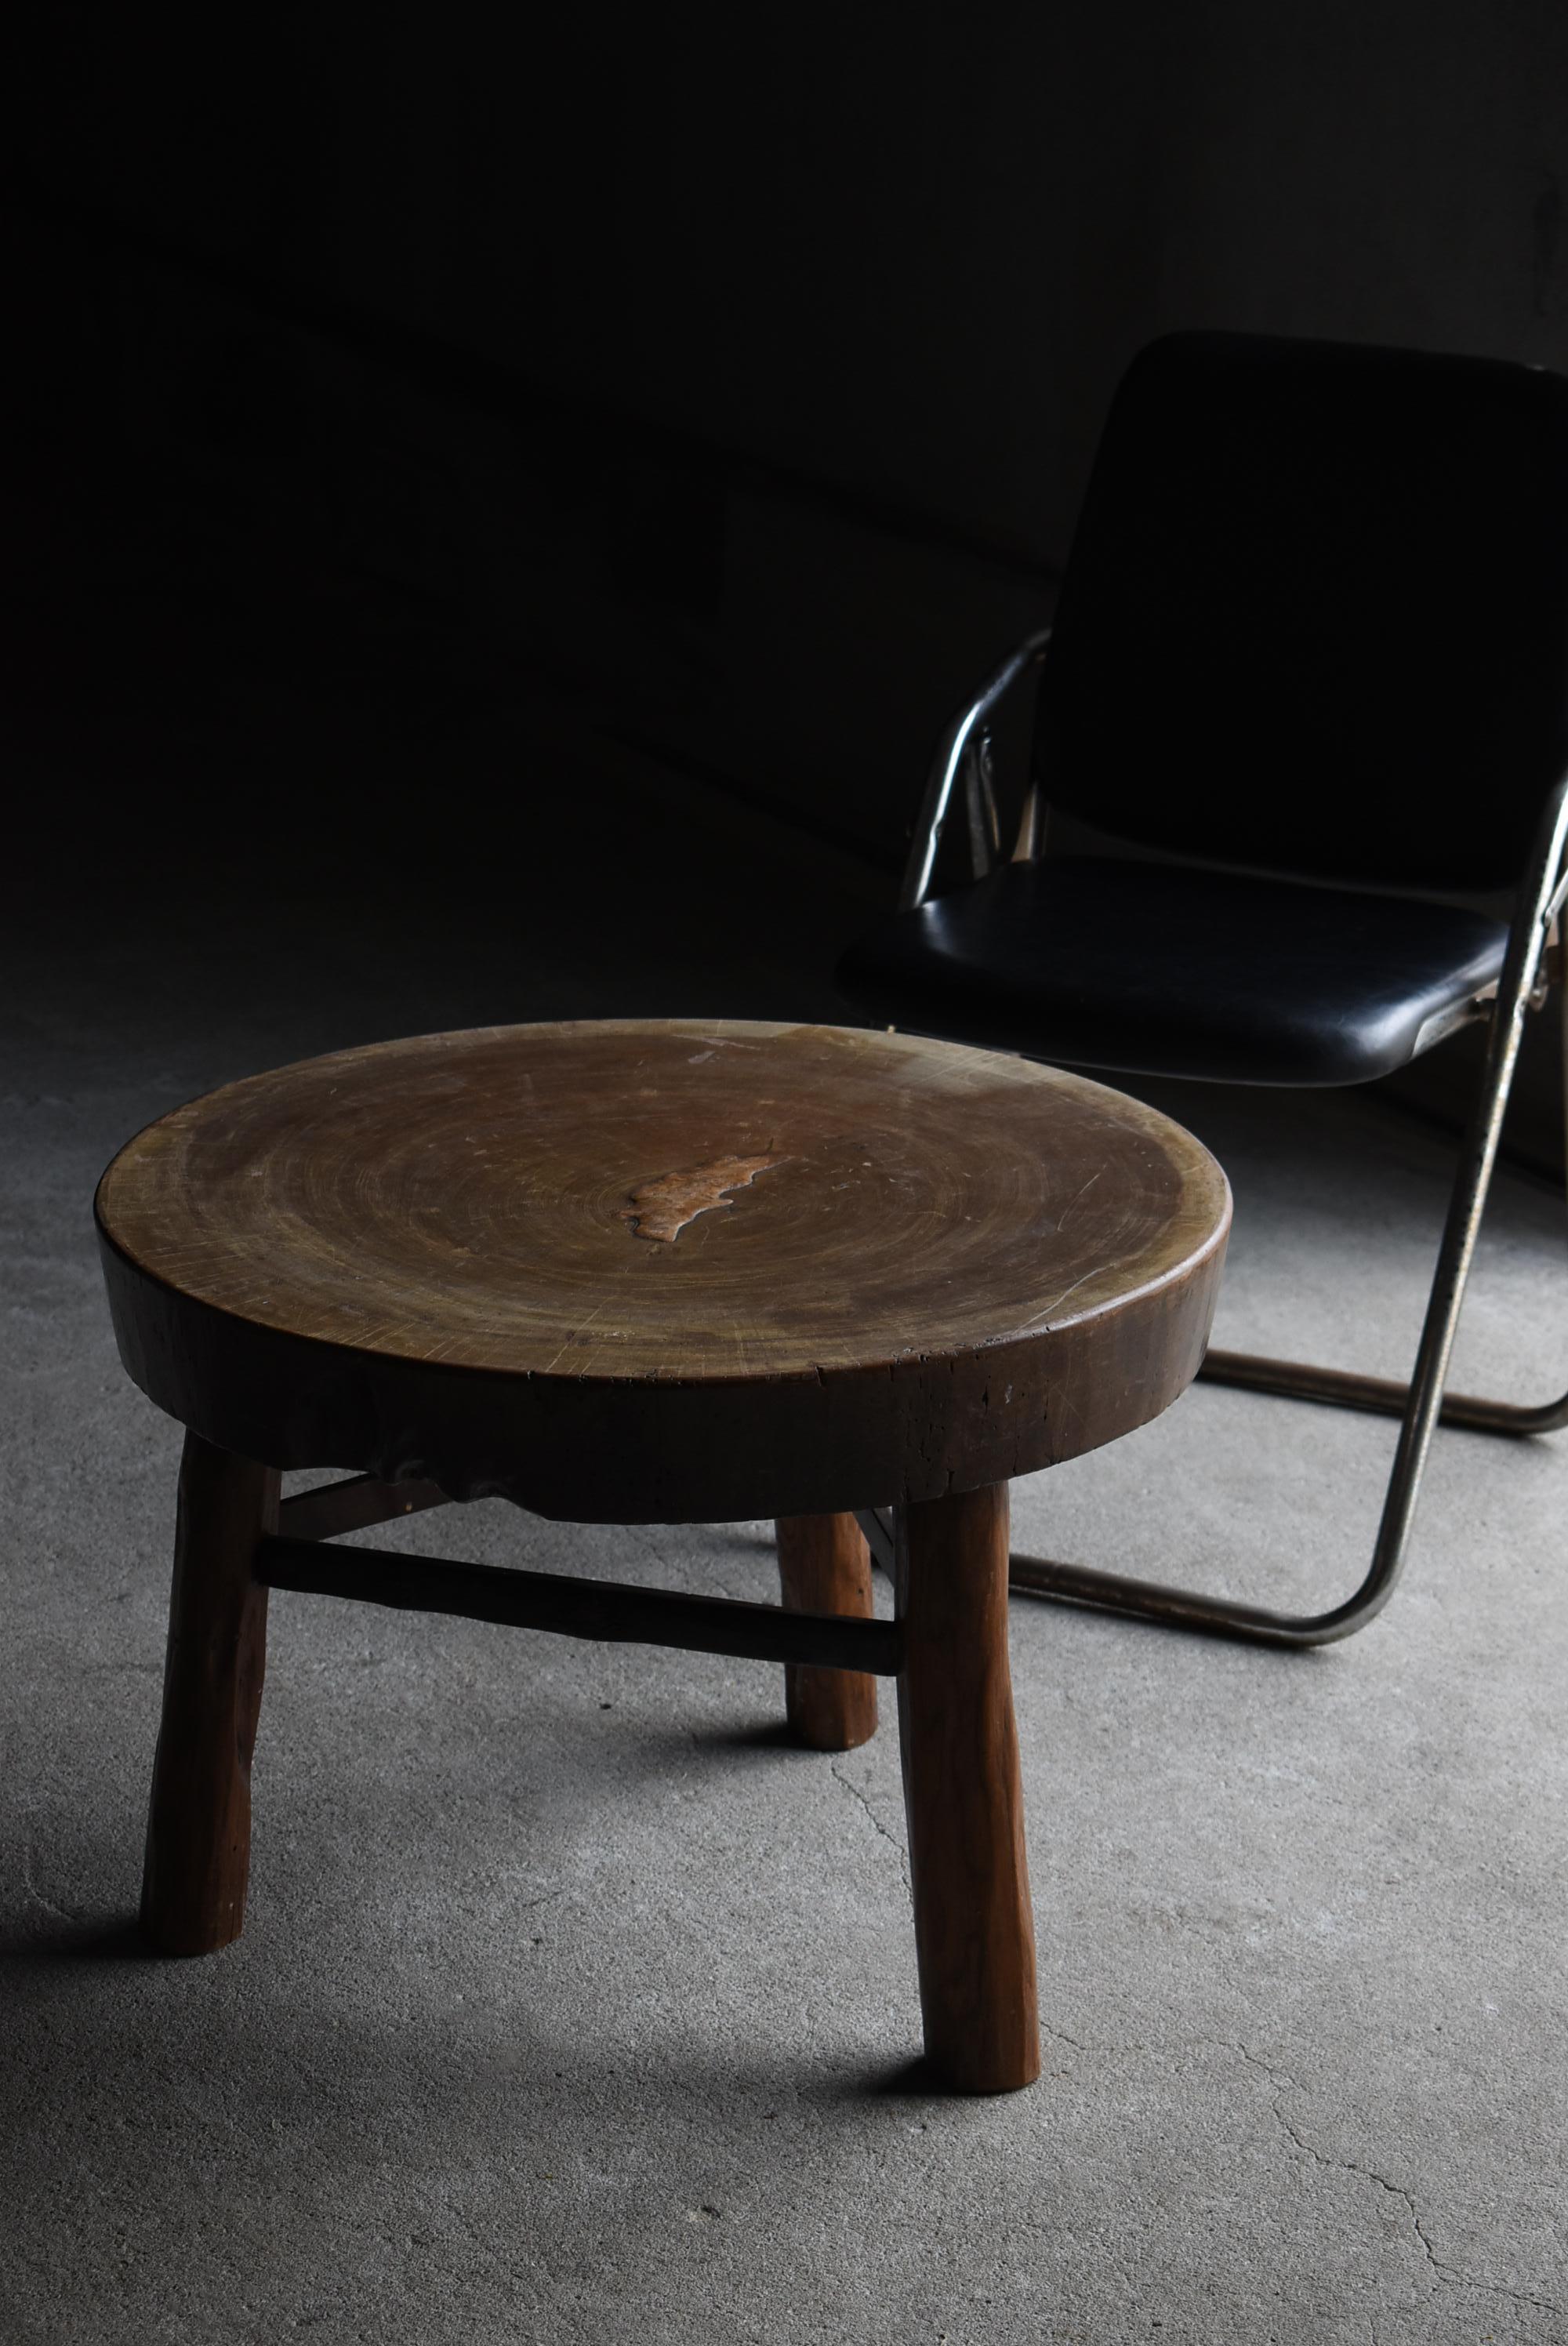 Showa Japanese Old Primitive Coffee Table 1940s-1960s / Round Table Mingei Wabisabi For Sale